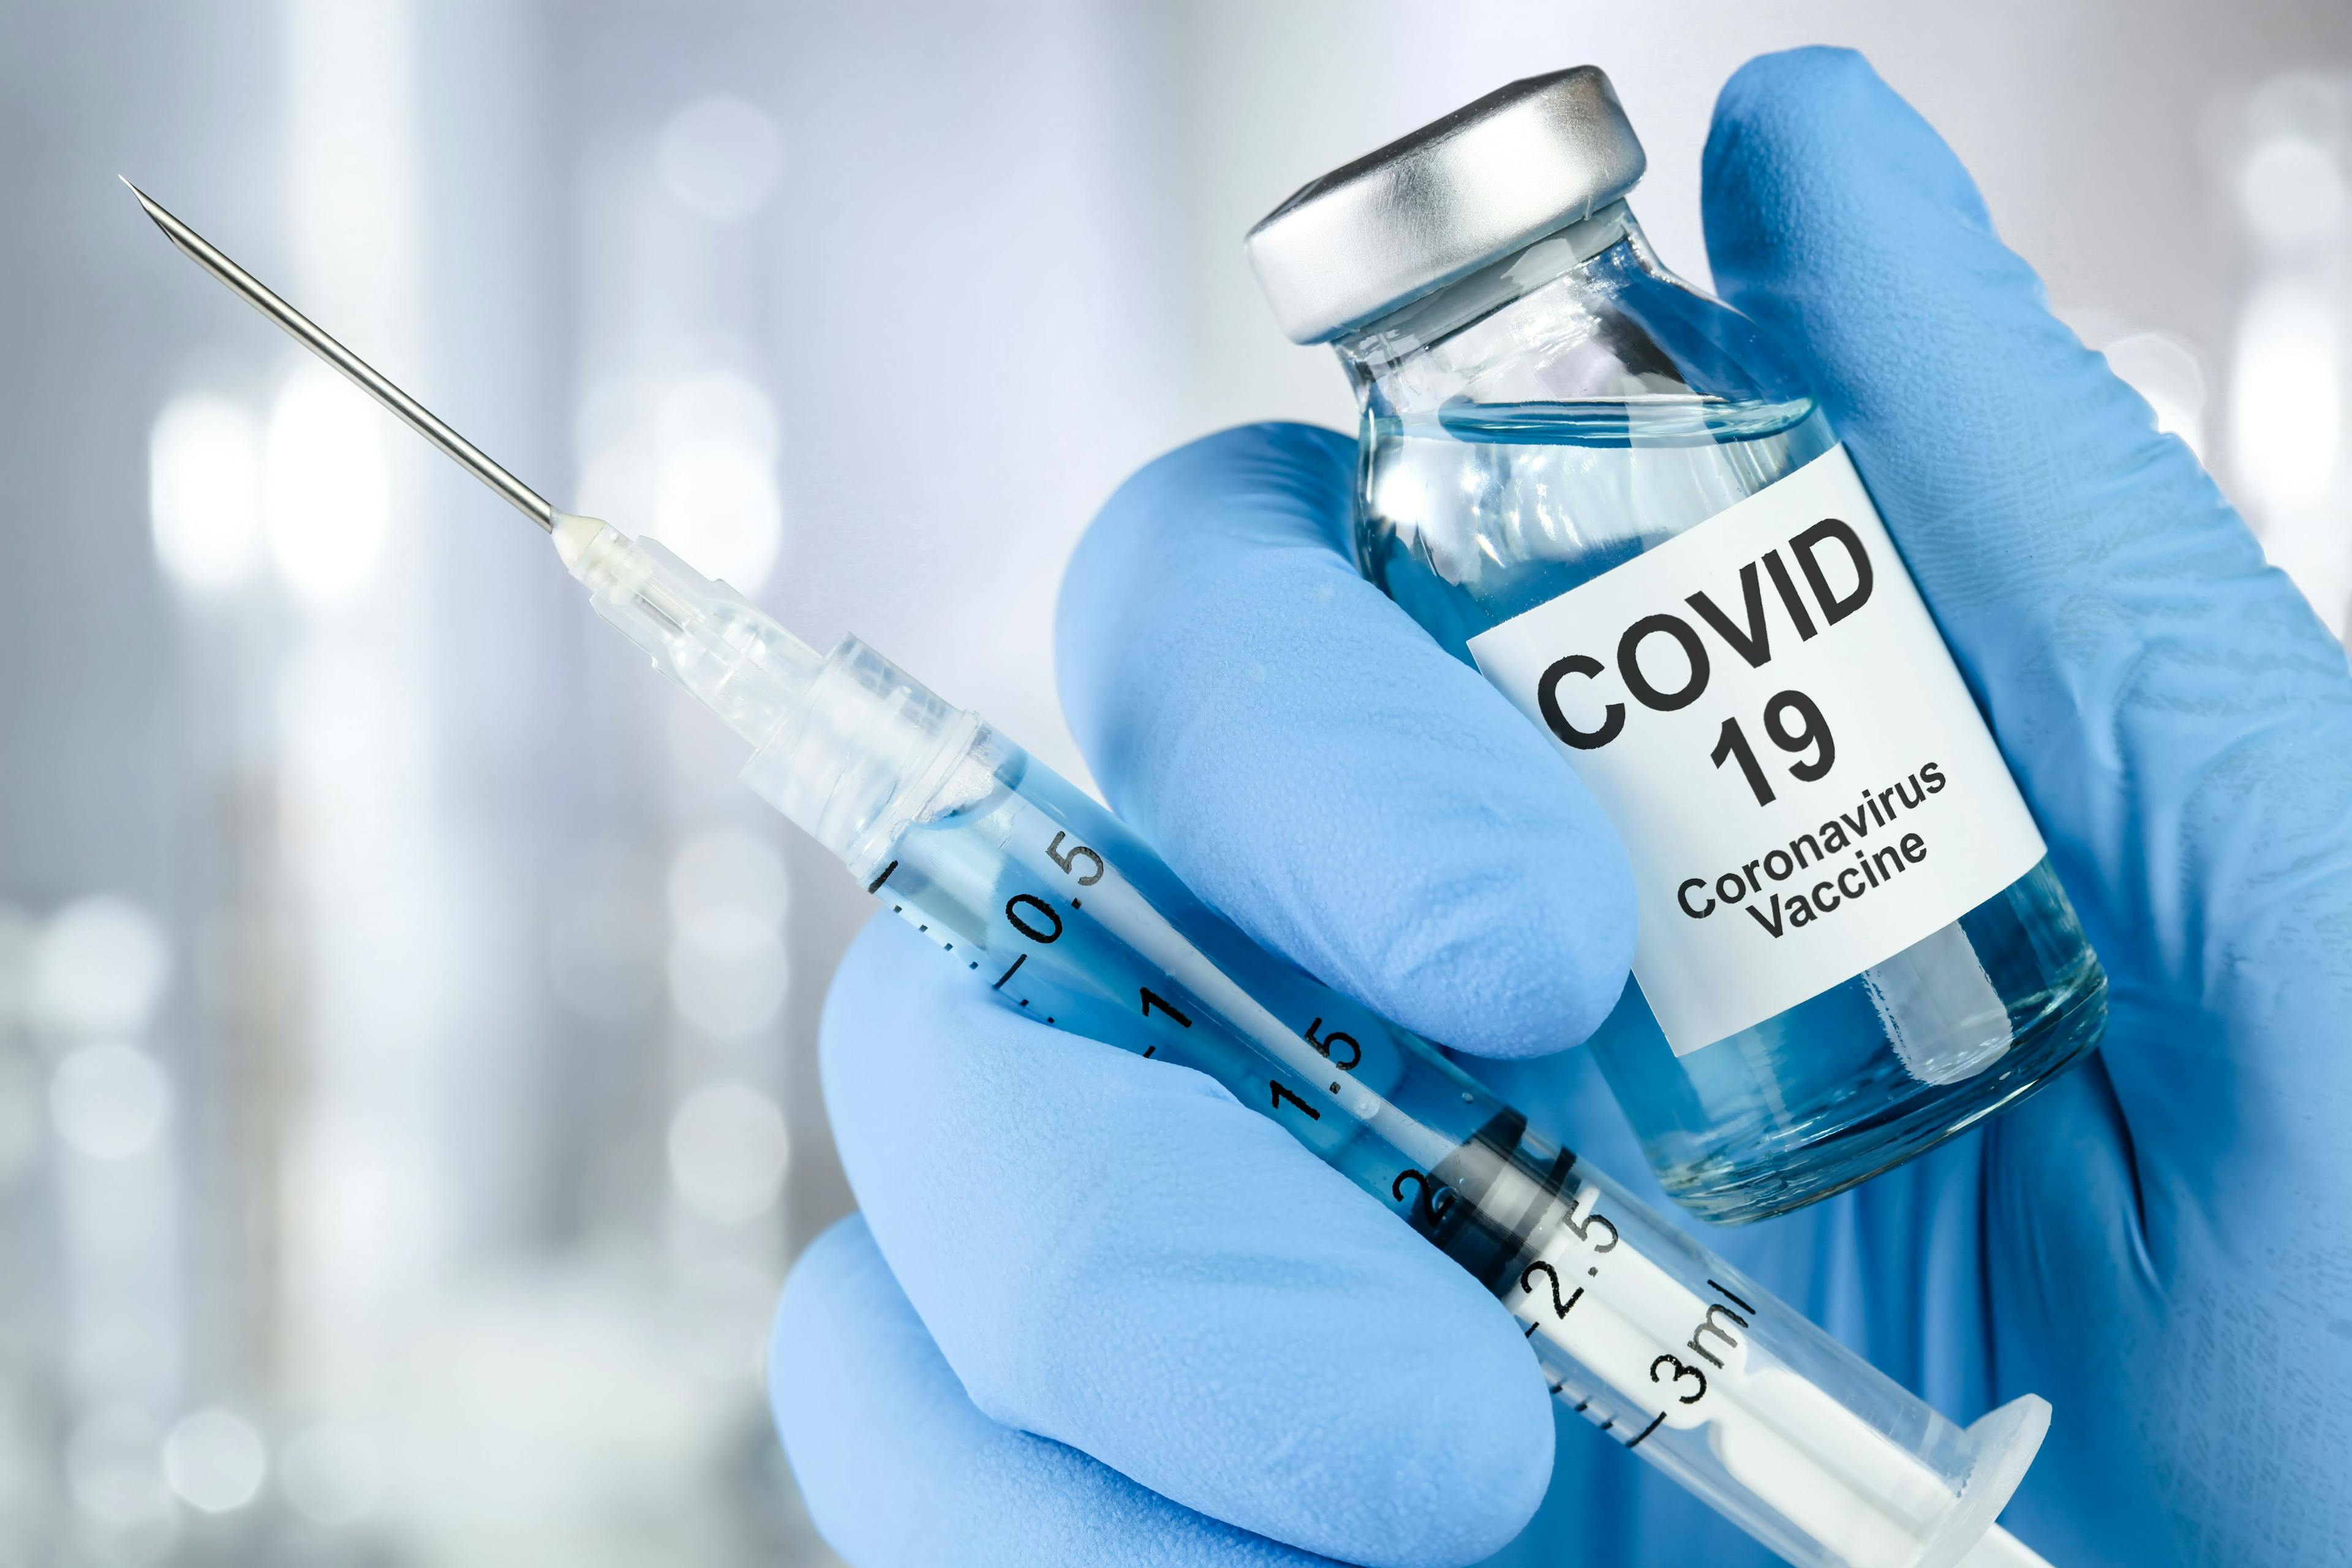 Pfizer-BioNTech COVID-19 vaccine authorized for emergency use